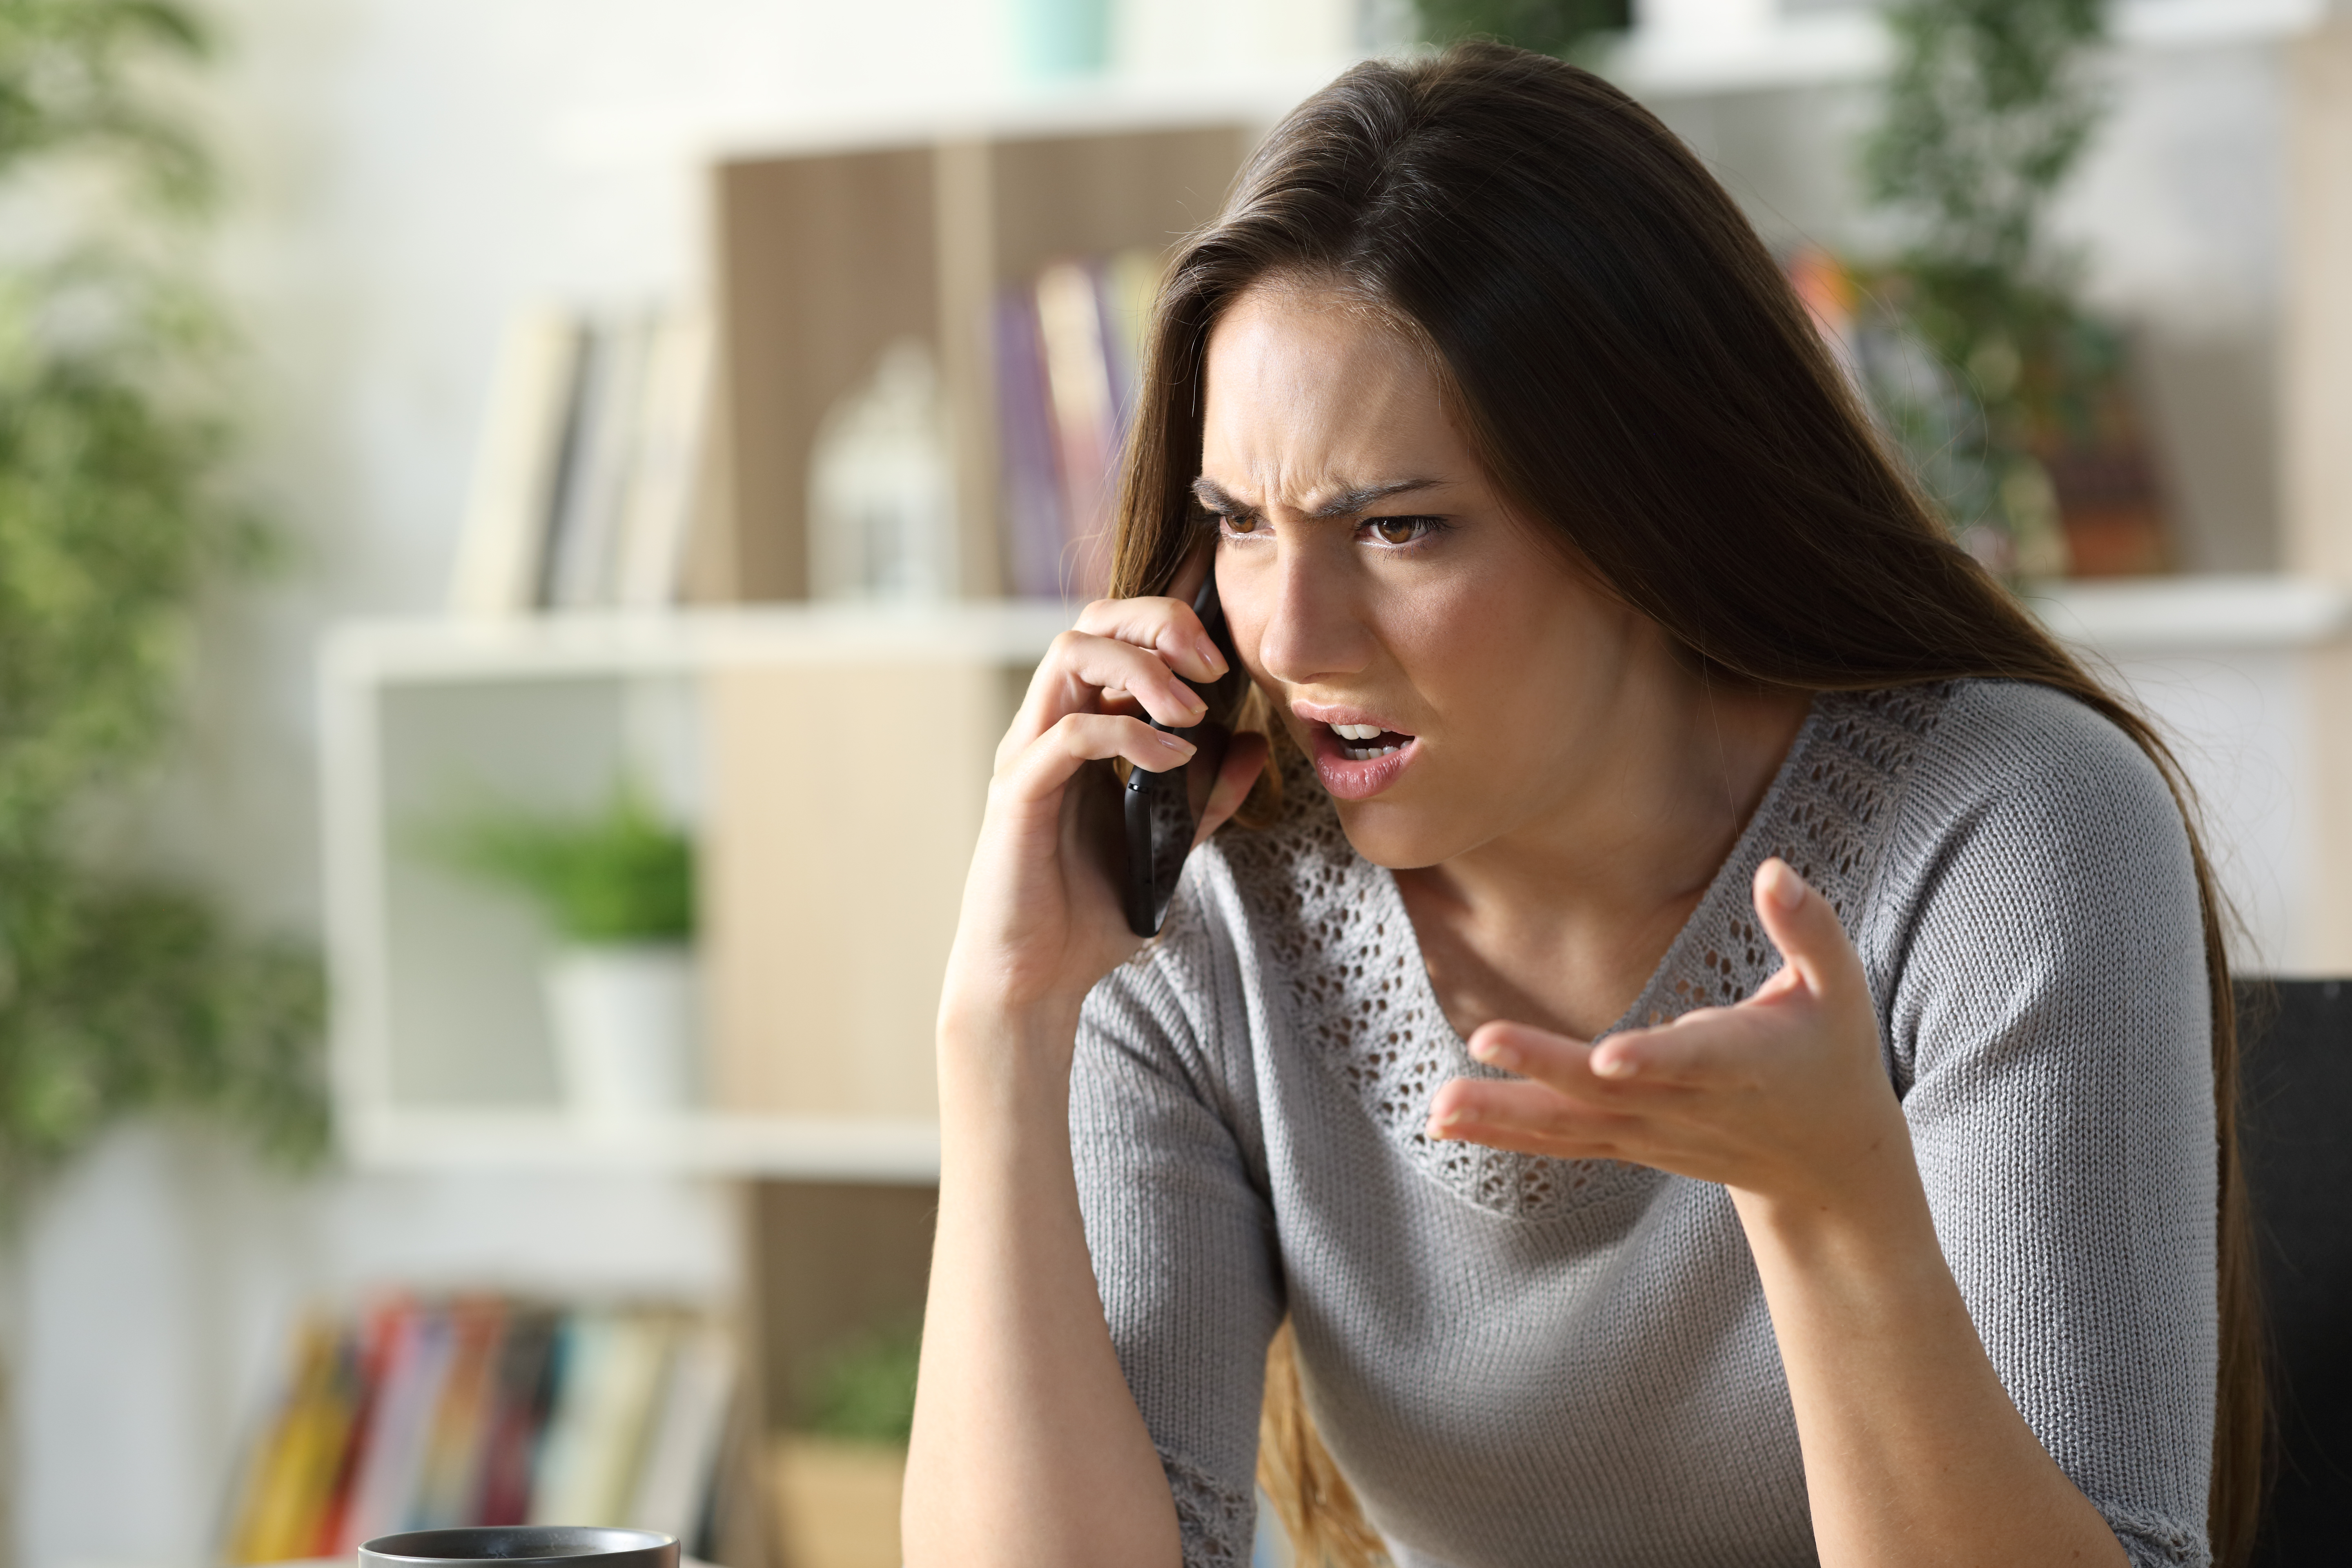 An angry woman on the phone | Source: Getty Images